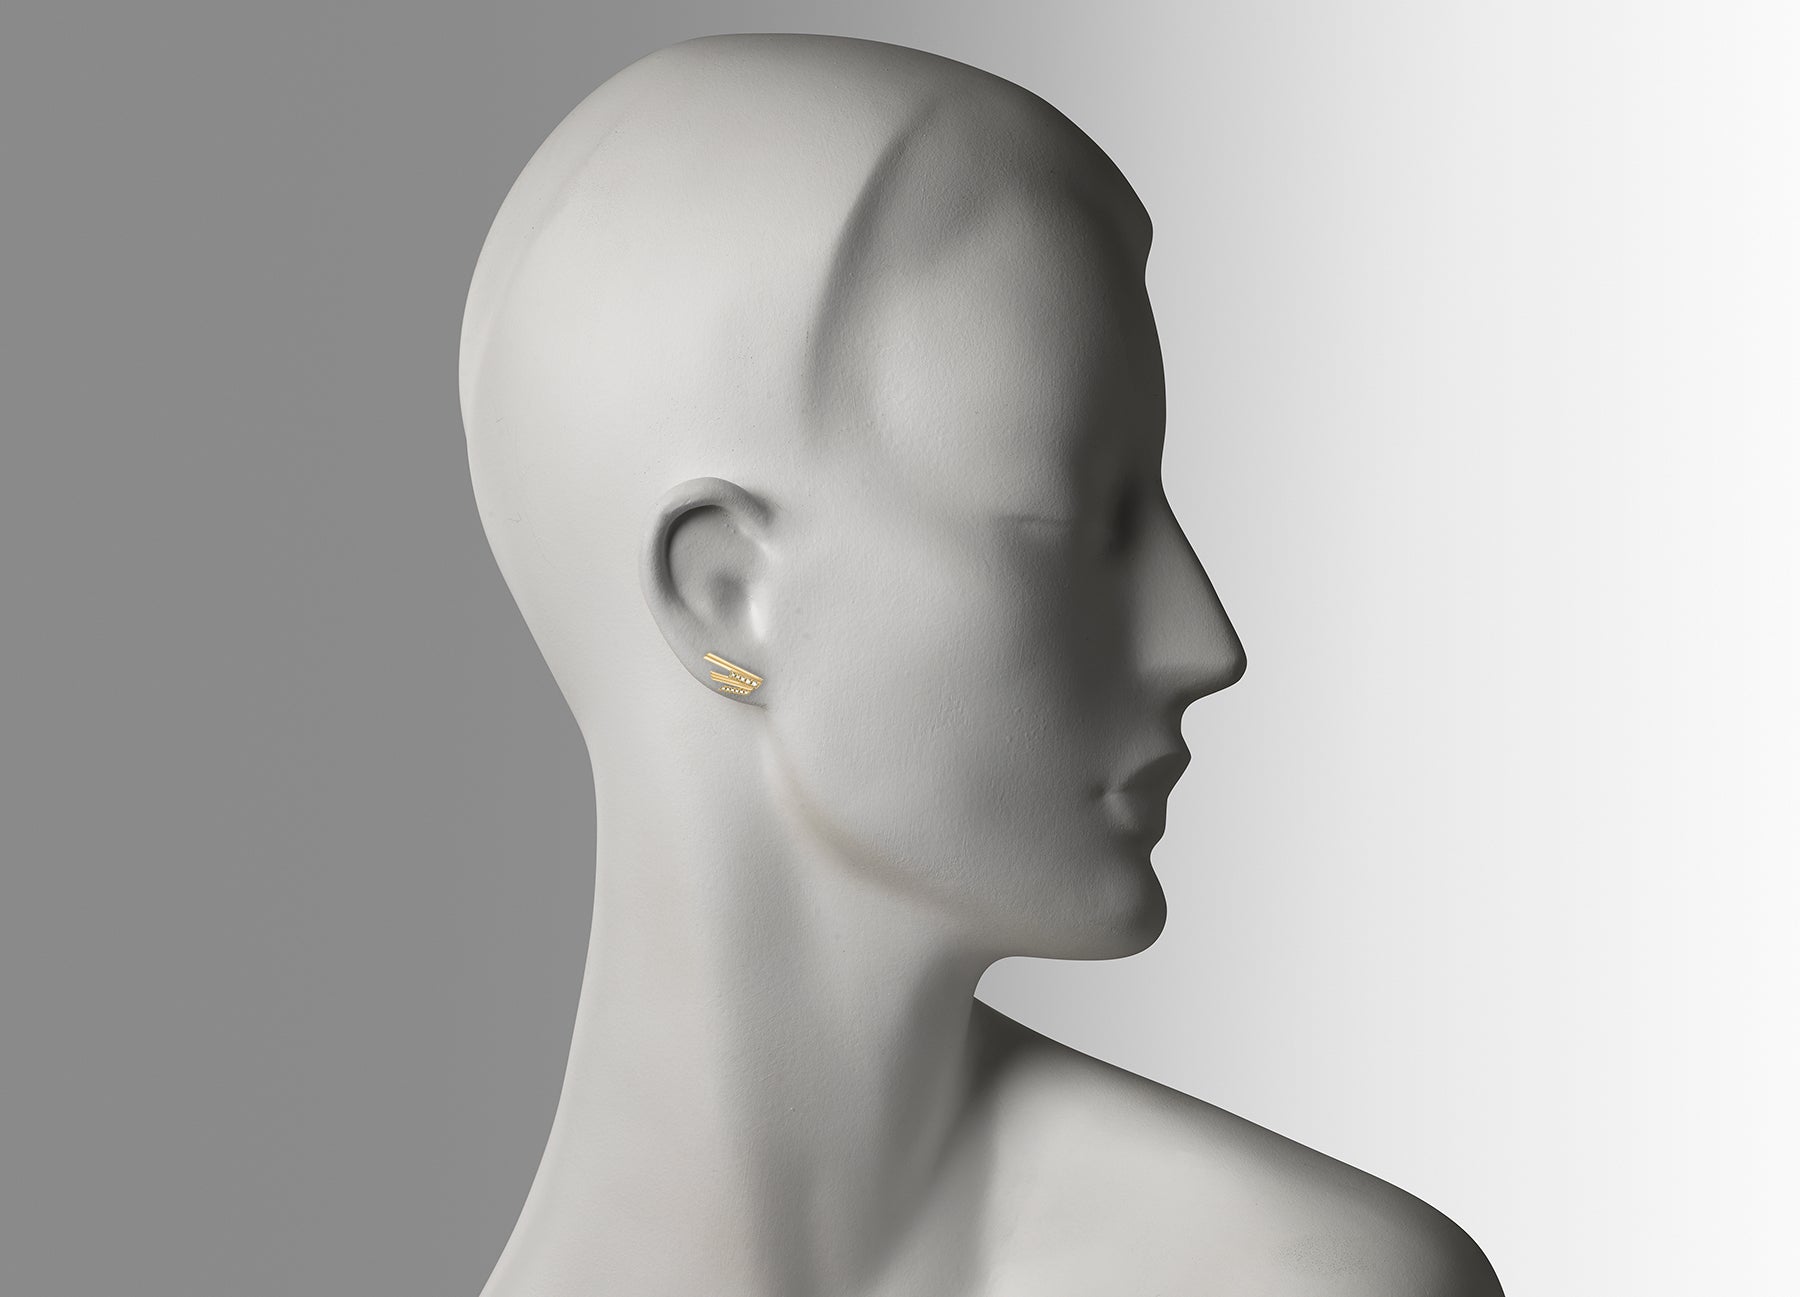 Stellar Stud earrings in 18K yellow gold with white diamonds by Tomasz Donocik worn on mannequin